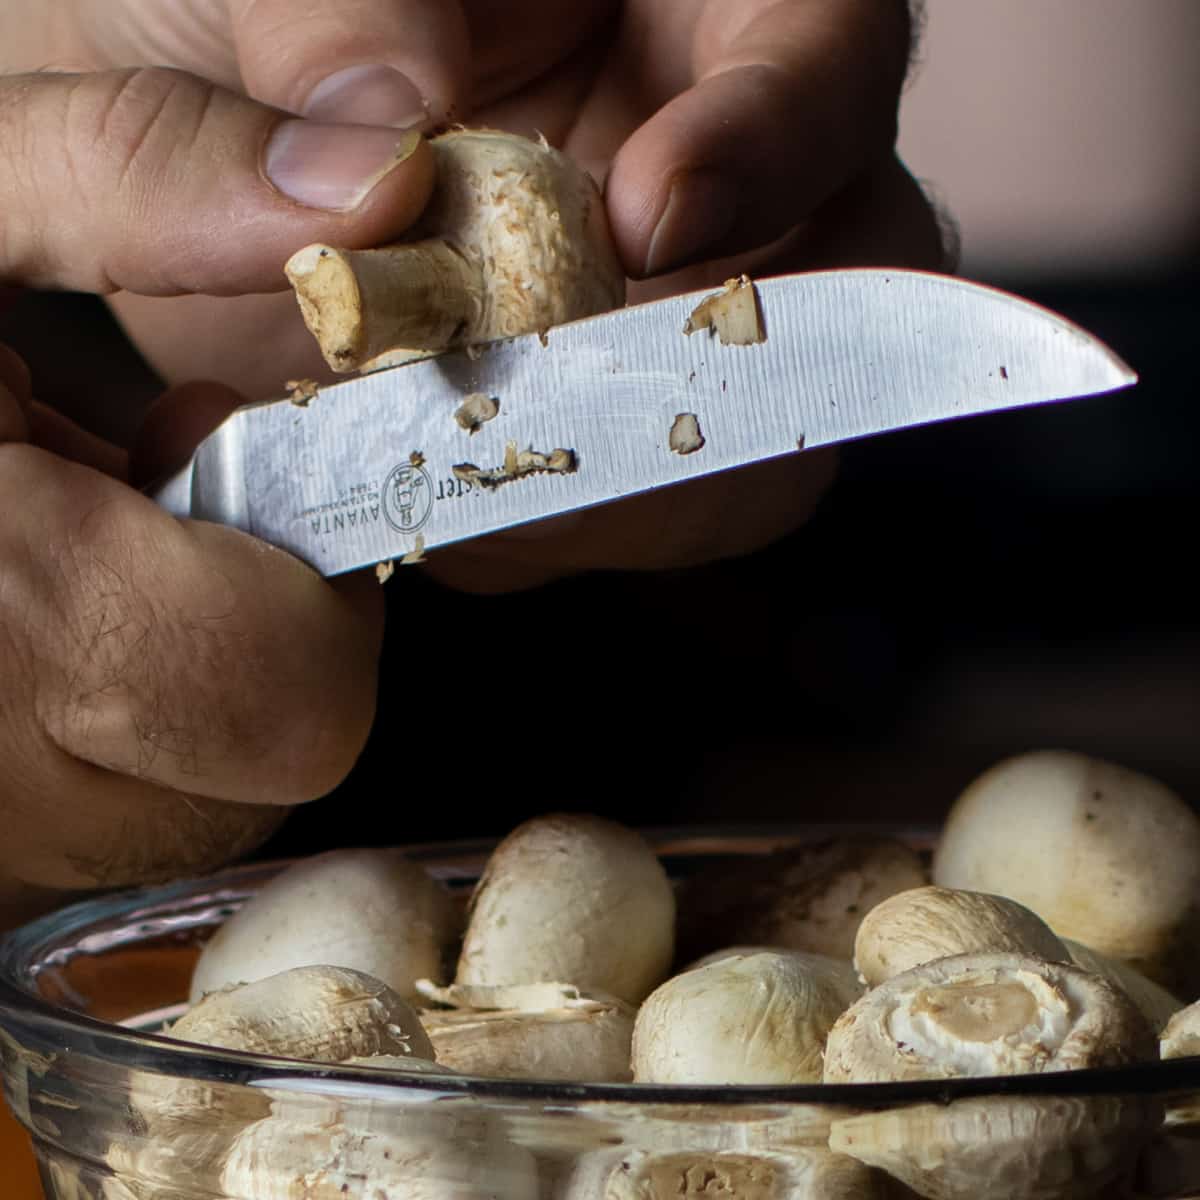 A close up picture of a mushroom step being cut off with a sharp knife.